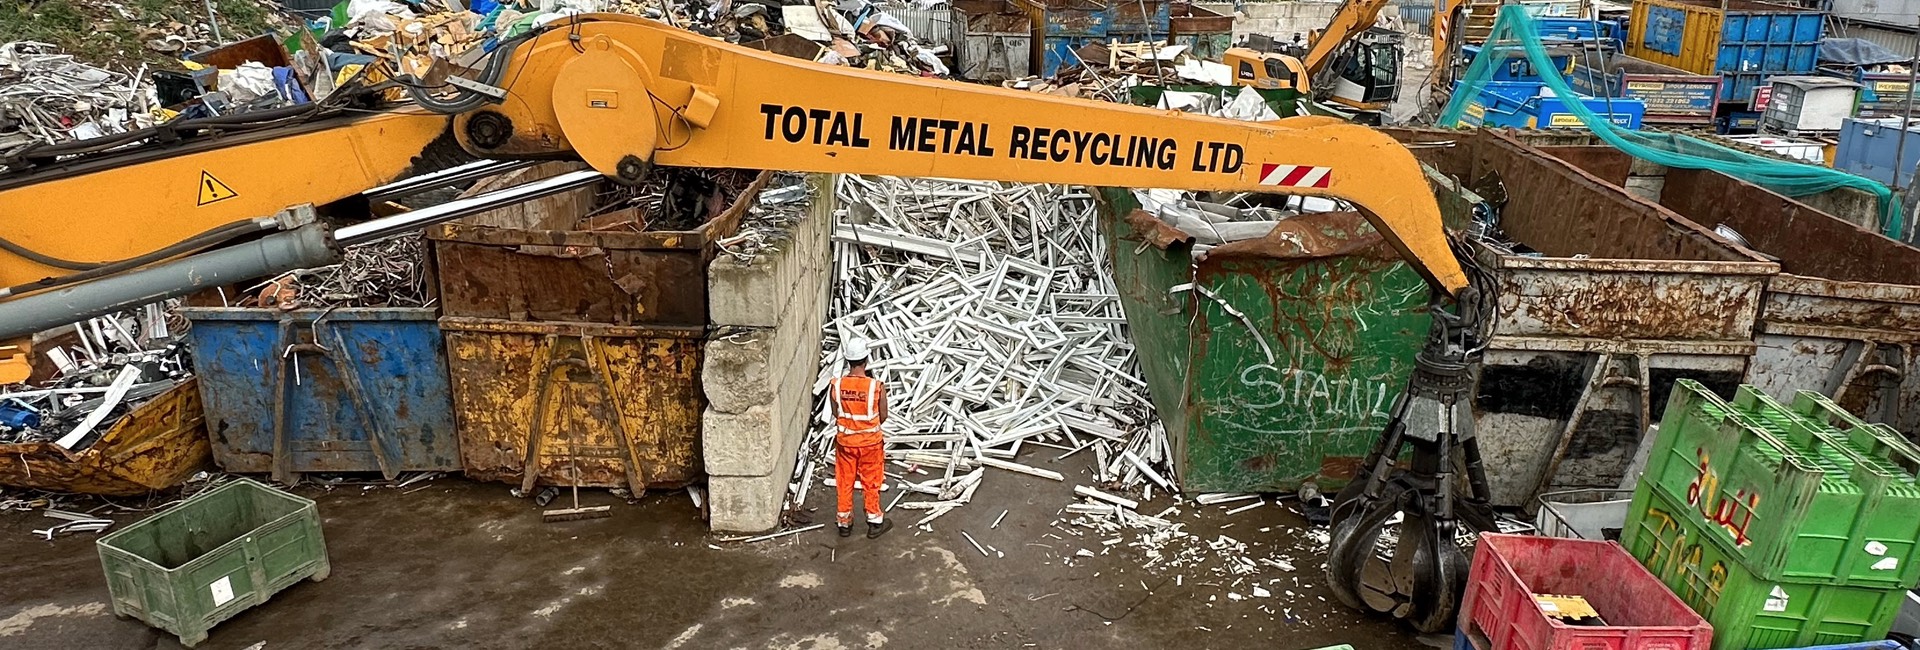 Worker wearing high-vis inspecting a uPVC window recycling bay